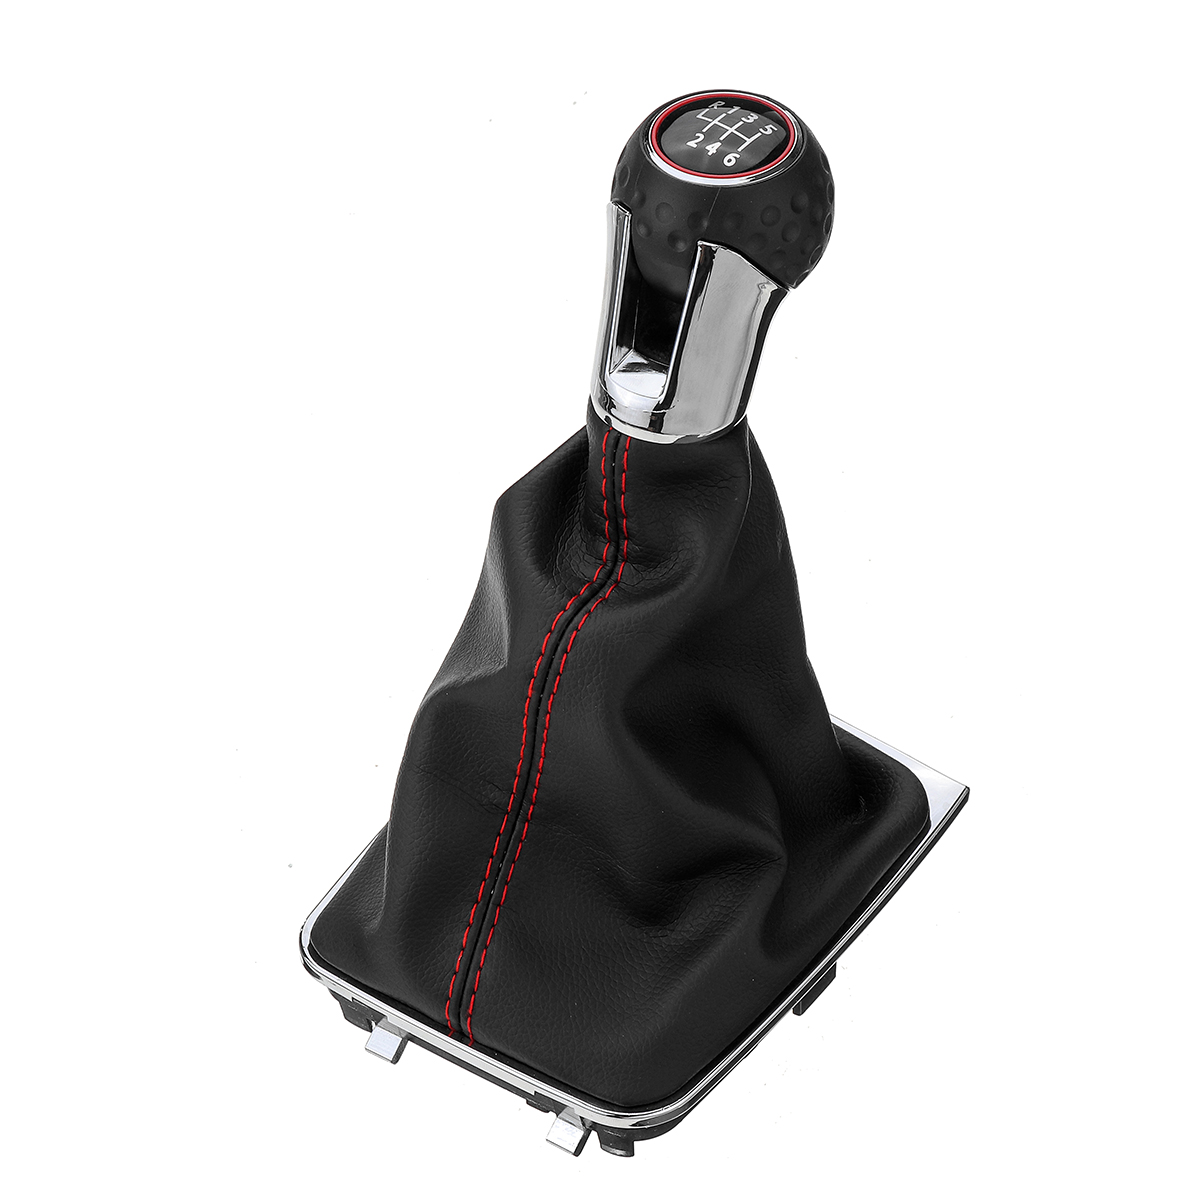 

6 Speed Car Gear Stick Level Shift Knob With Leather Boot for VW